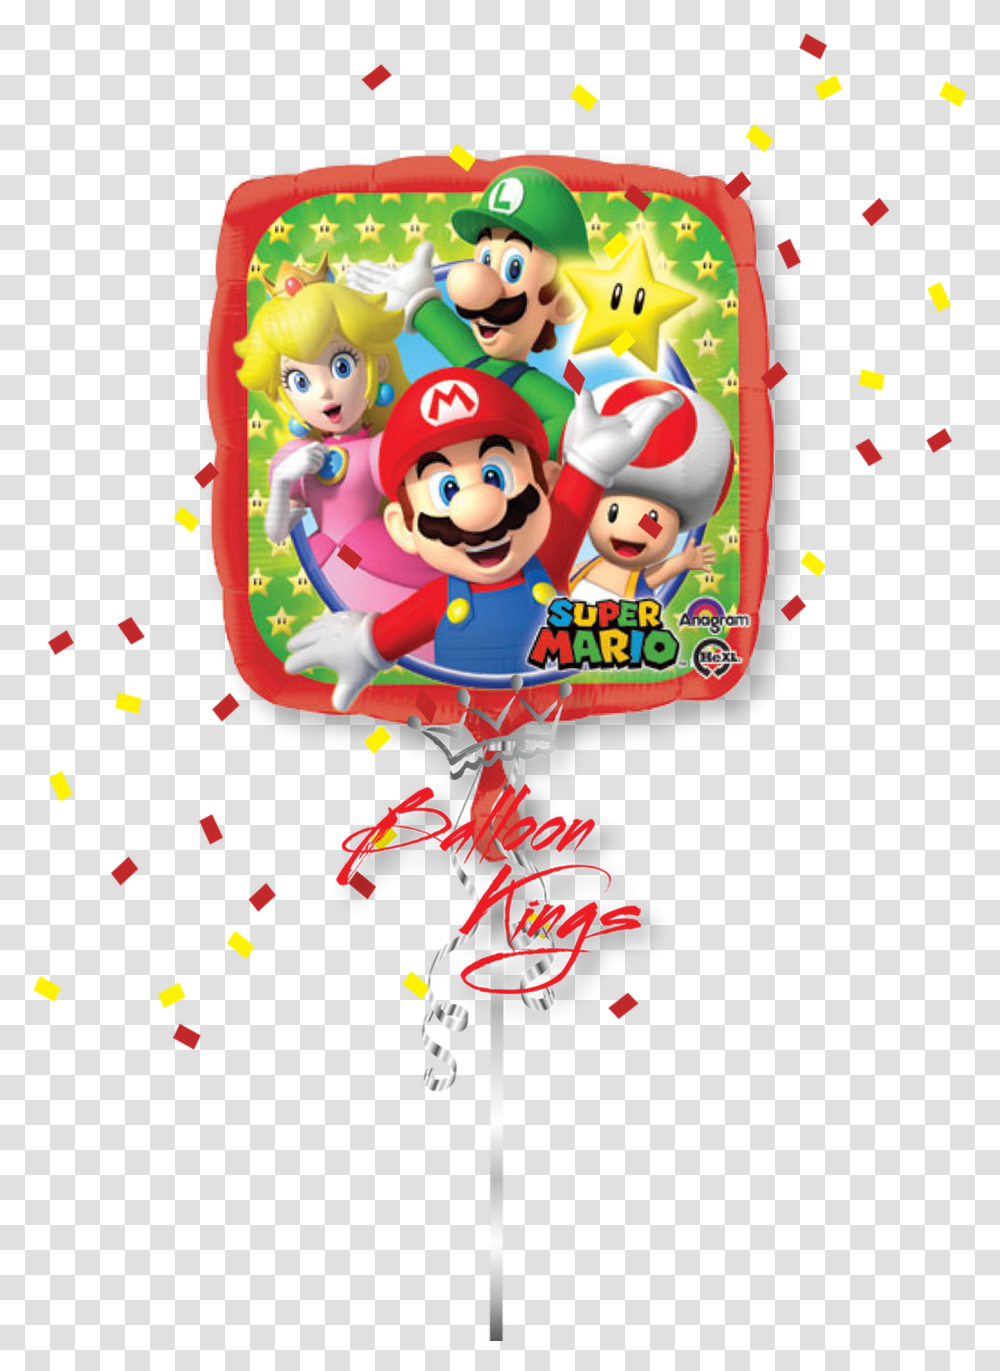 Super Mario Bros Group Mario Bros And Friends, Toy Transparent Png